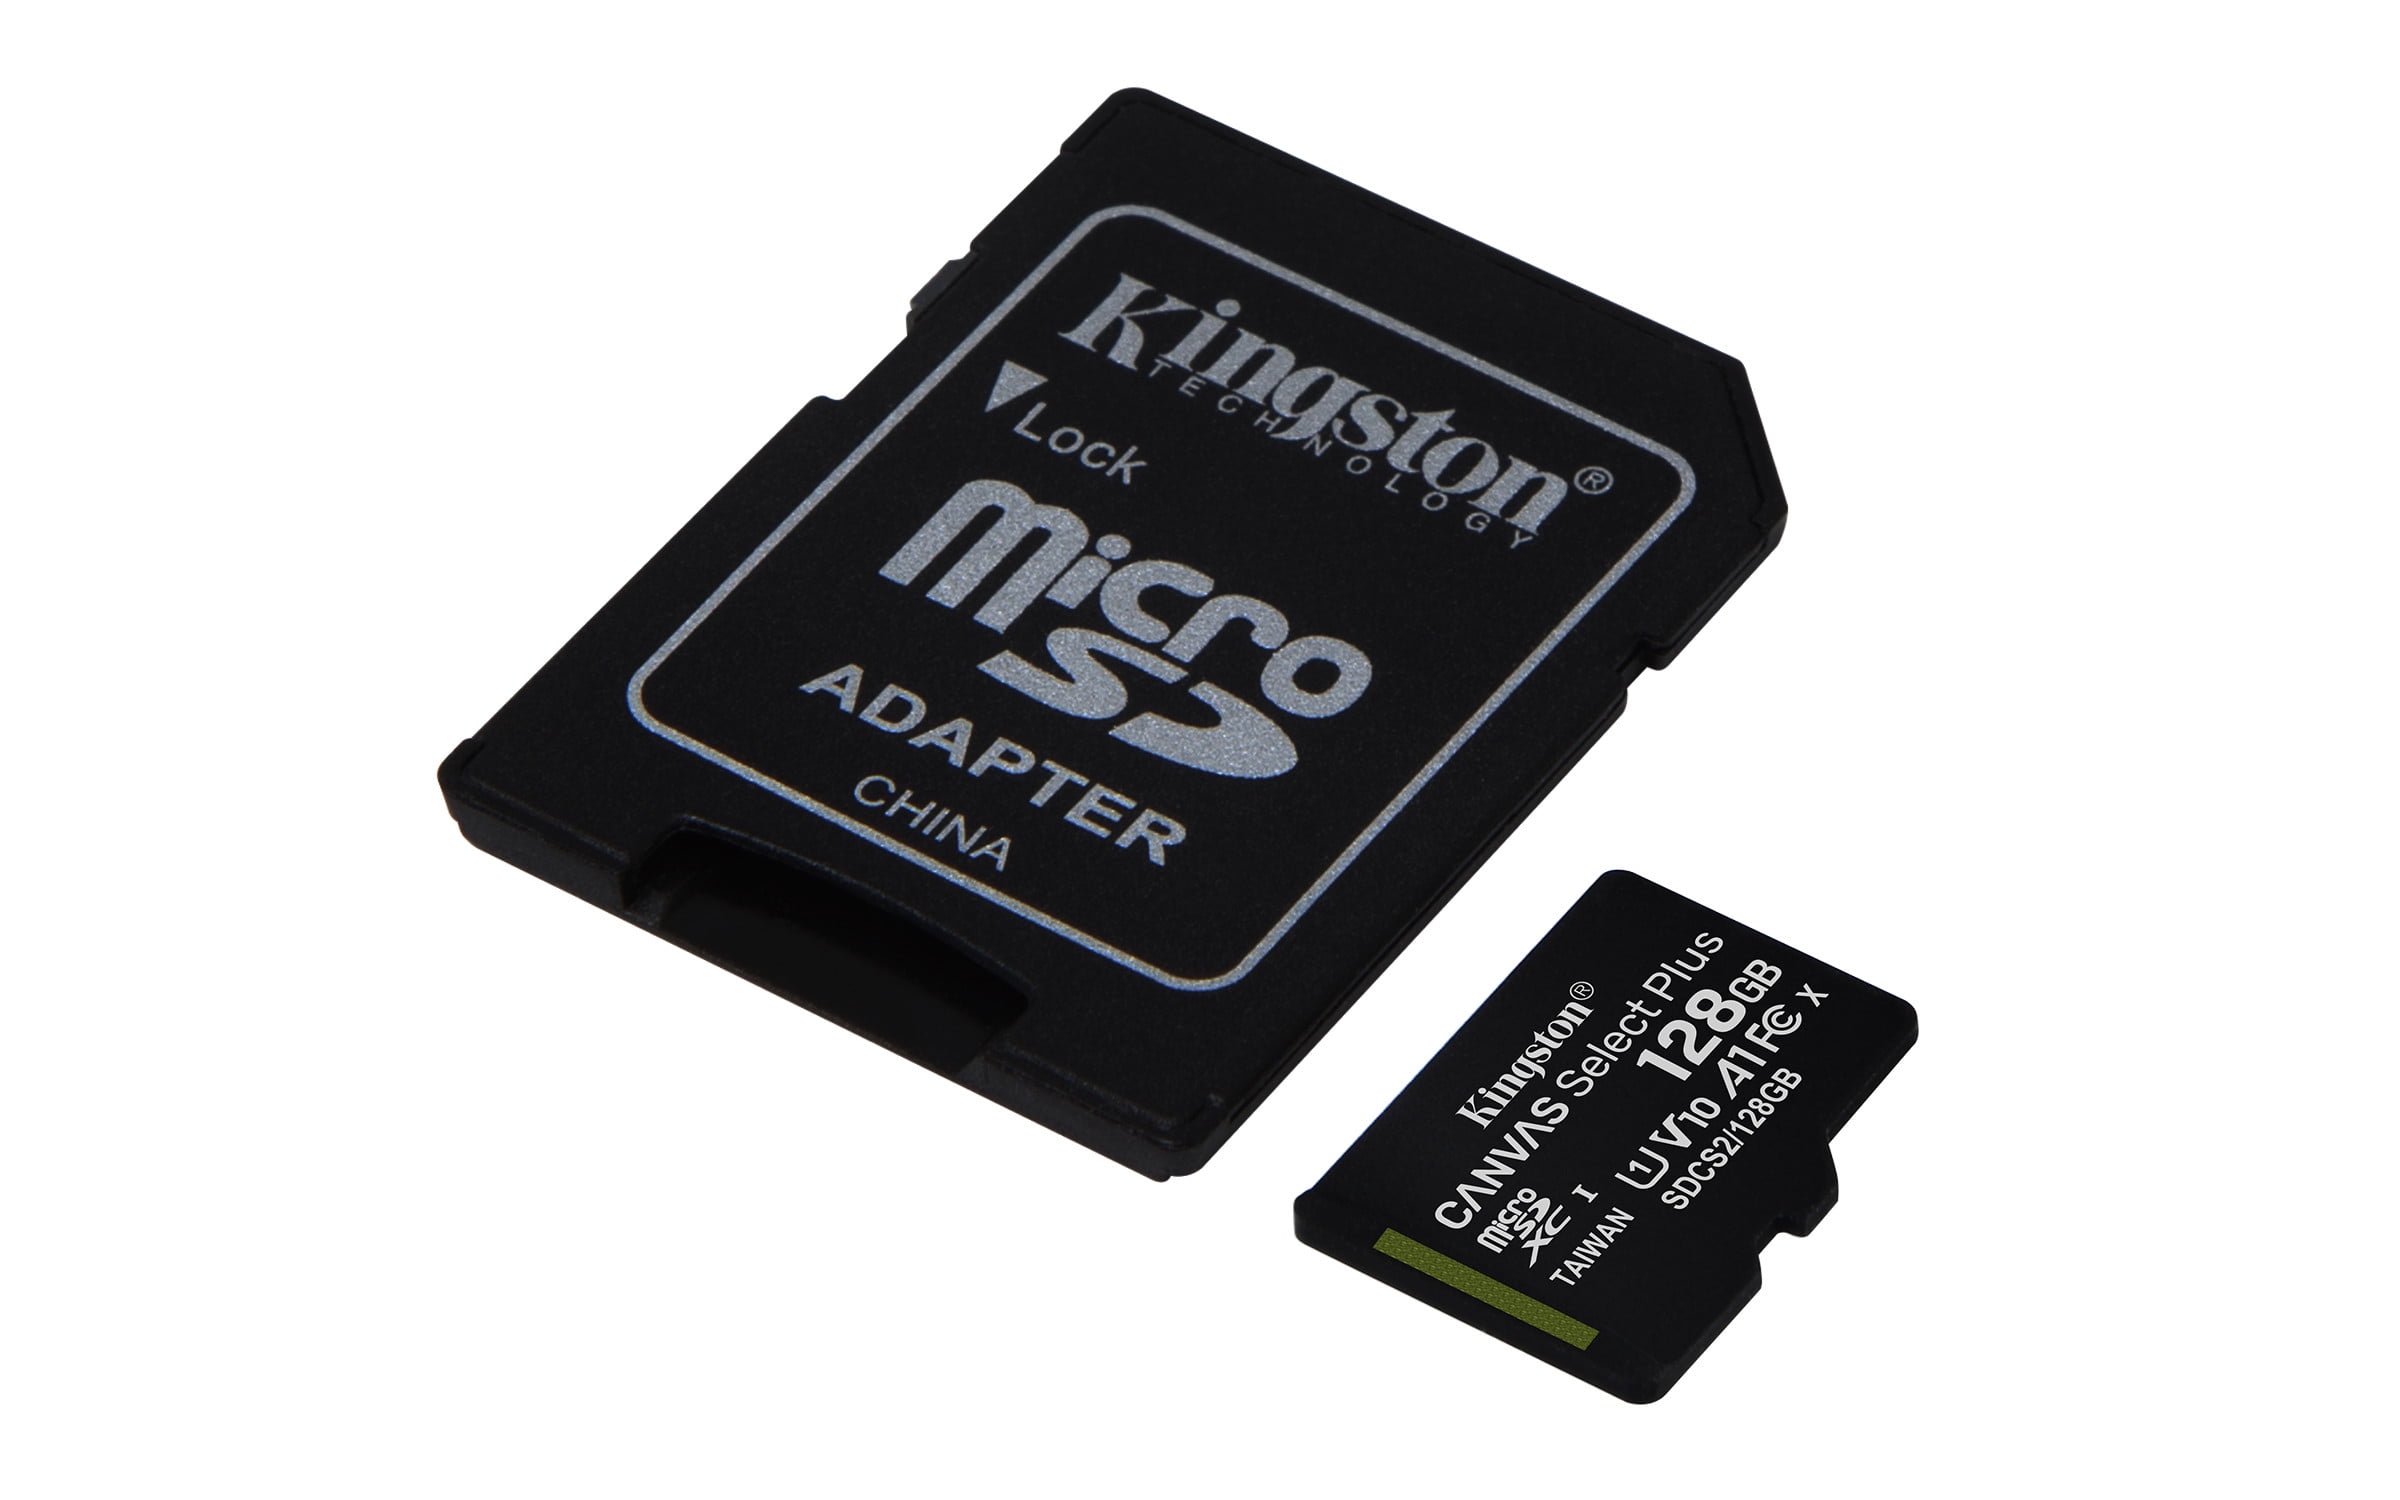 100MBs Works with Kingston Kingston 64GB Honor 8 Pro MicroSDXC Canvas Select Plus Card Verified by SanFlash.